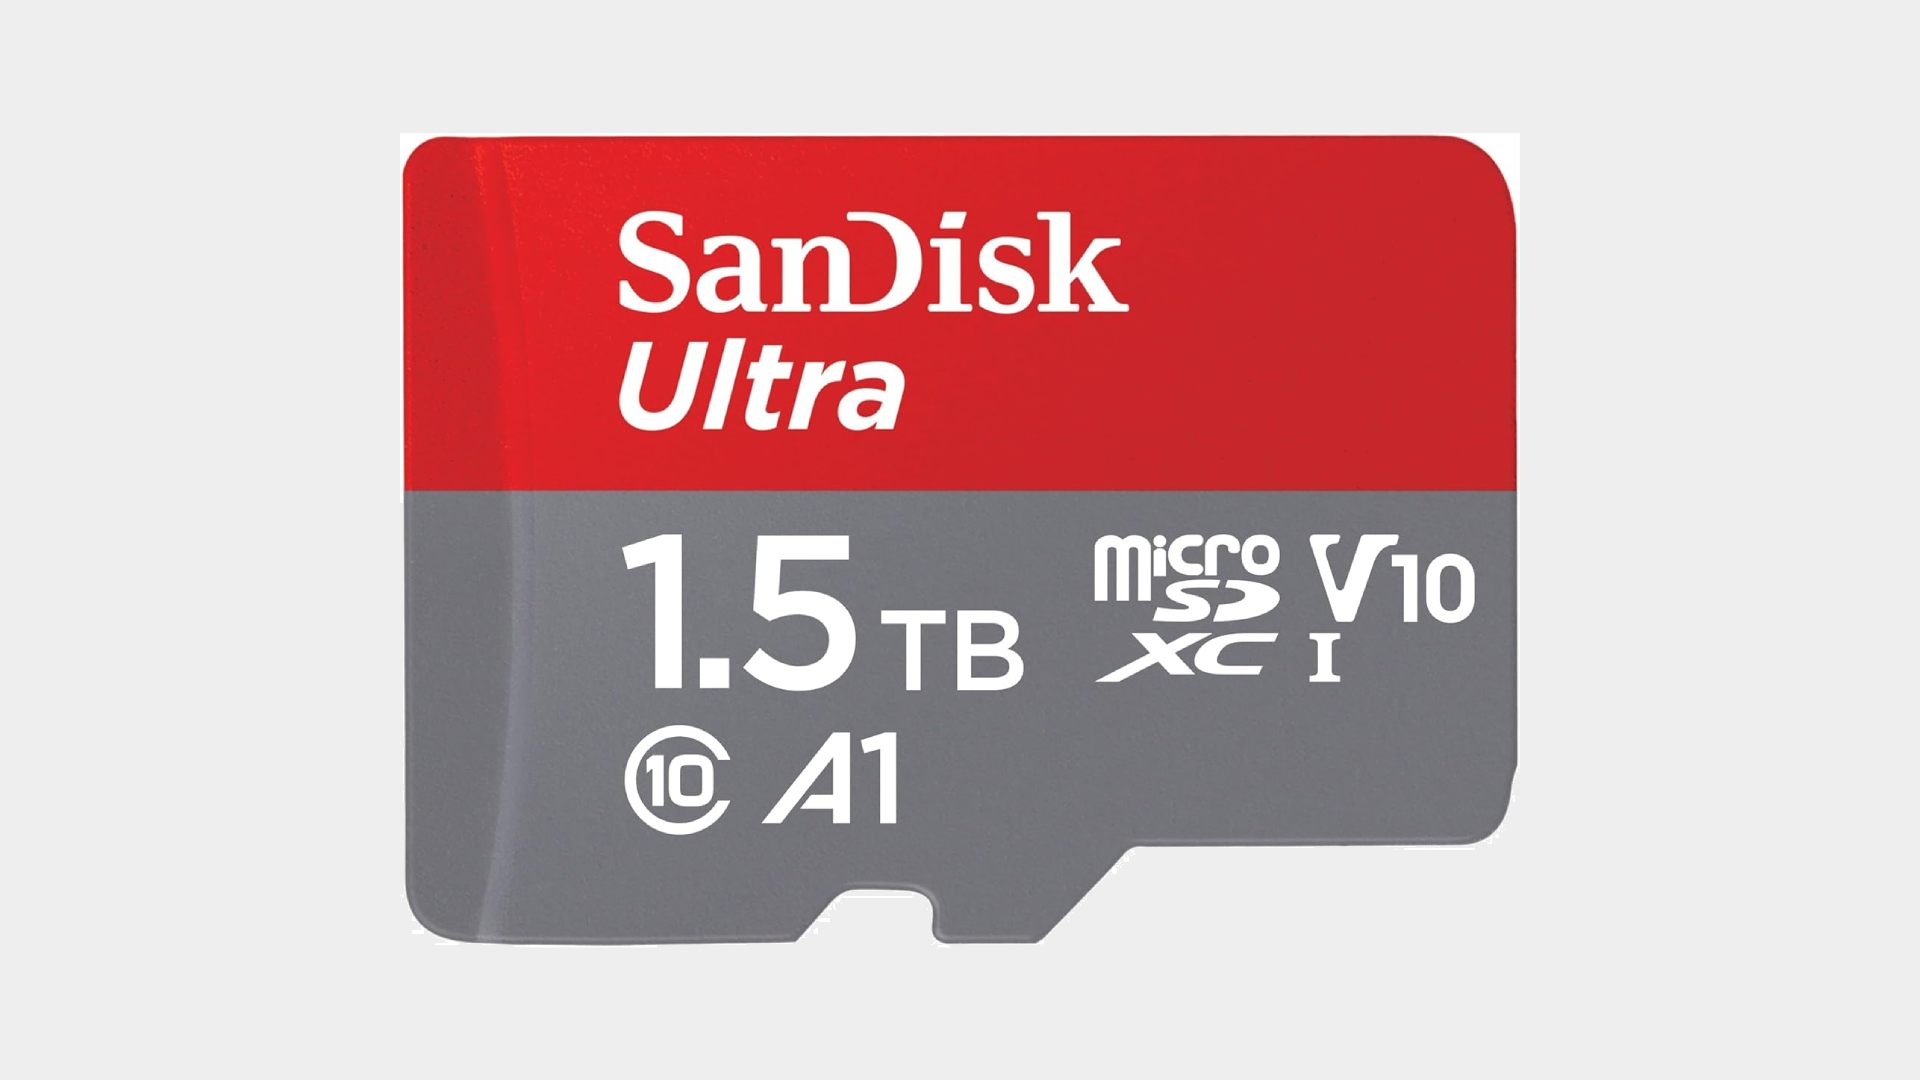 Sandisk Ultra 1.5TB microSD card with grey backdrop